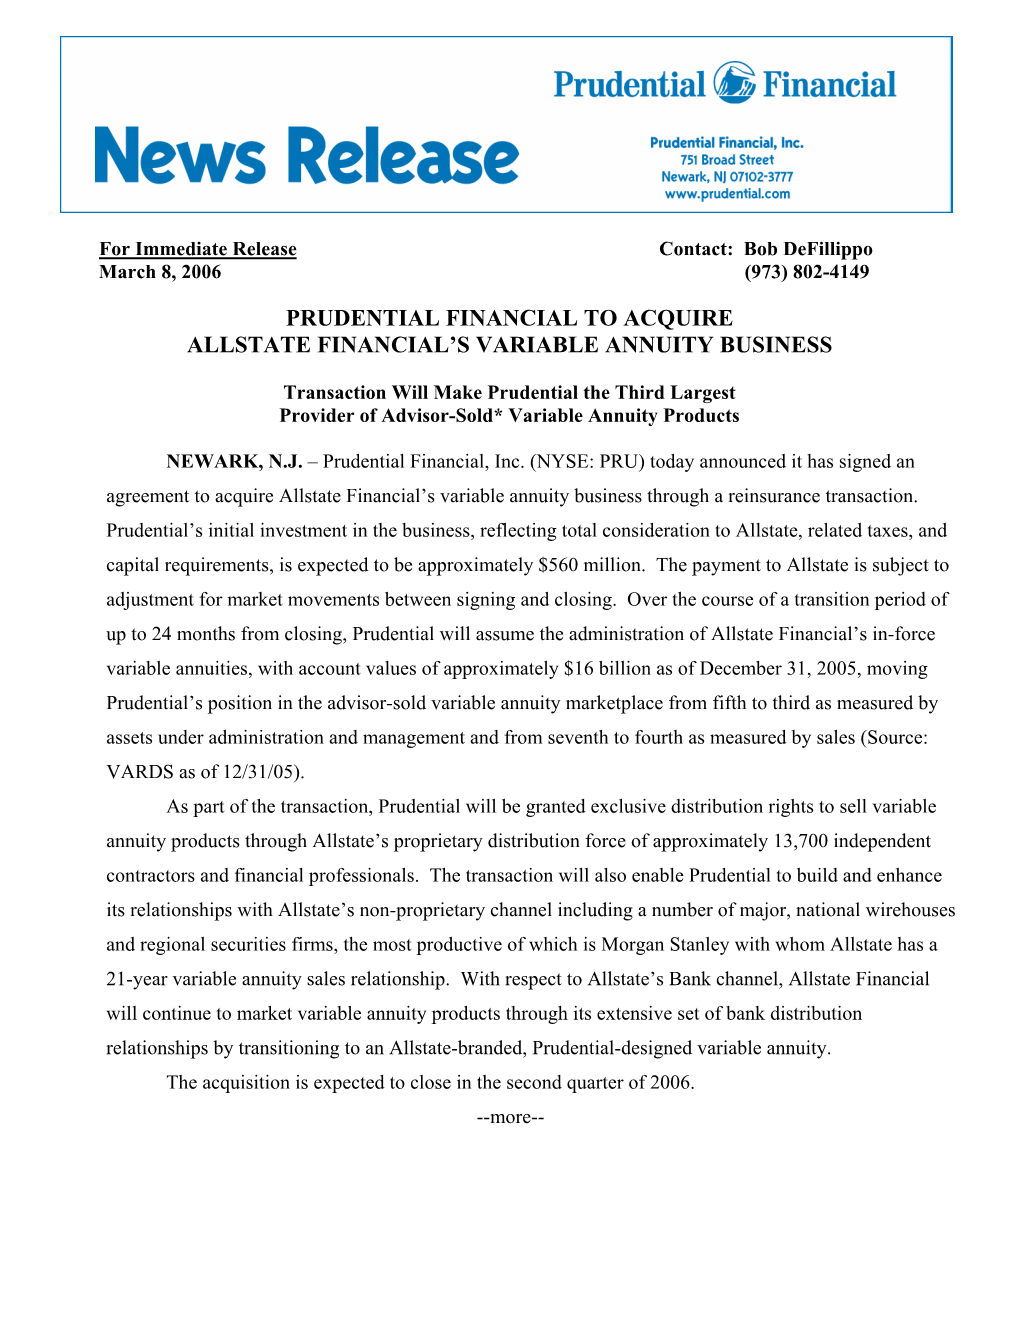 Prudential Financial to Acquire Allstate Financial's